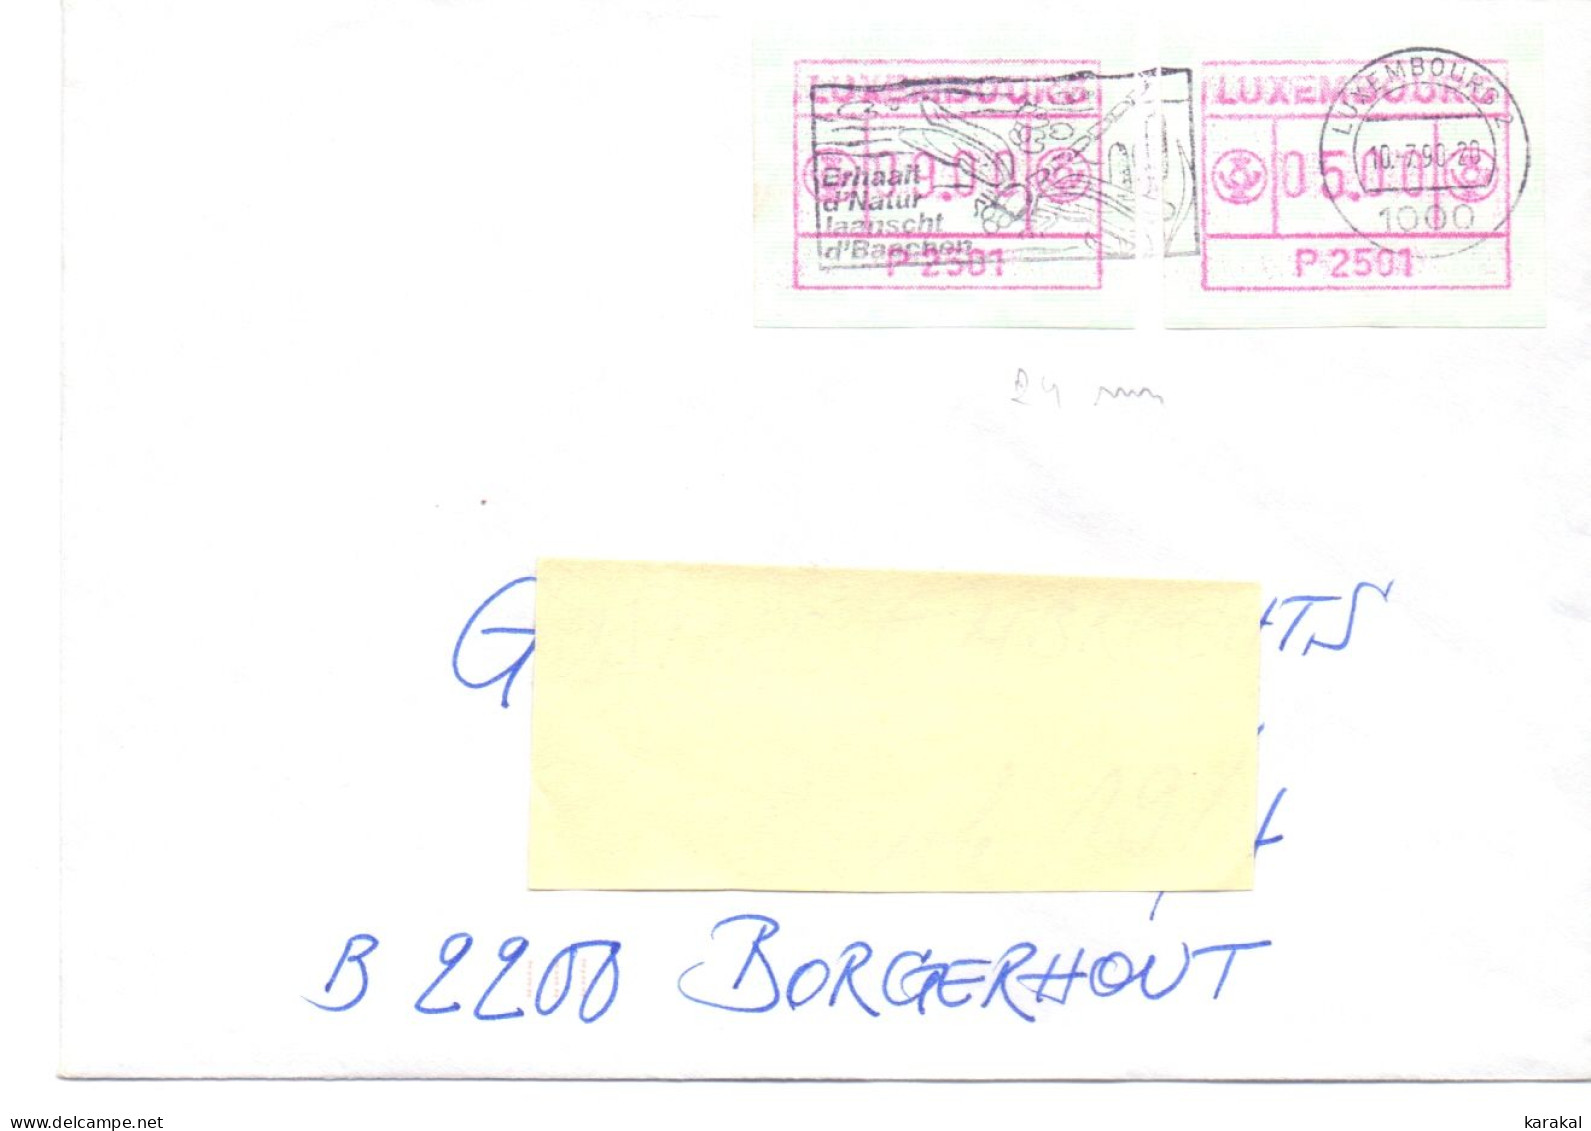 Luxembourg ATM Frama MiNr. 1.1 P2501 Firefly Libellule On Circulated Letter To Borgerhout Belgium 1990 - Postage Labels